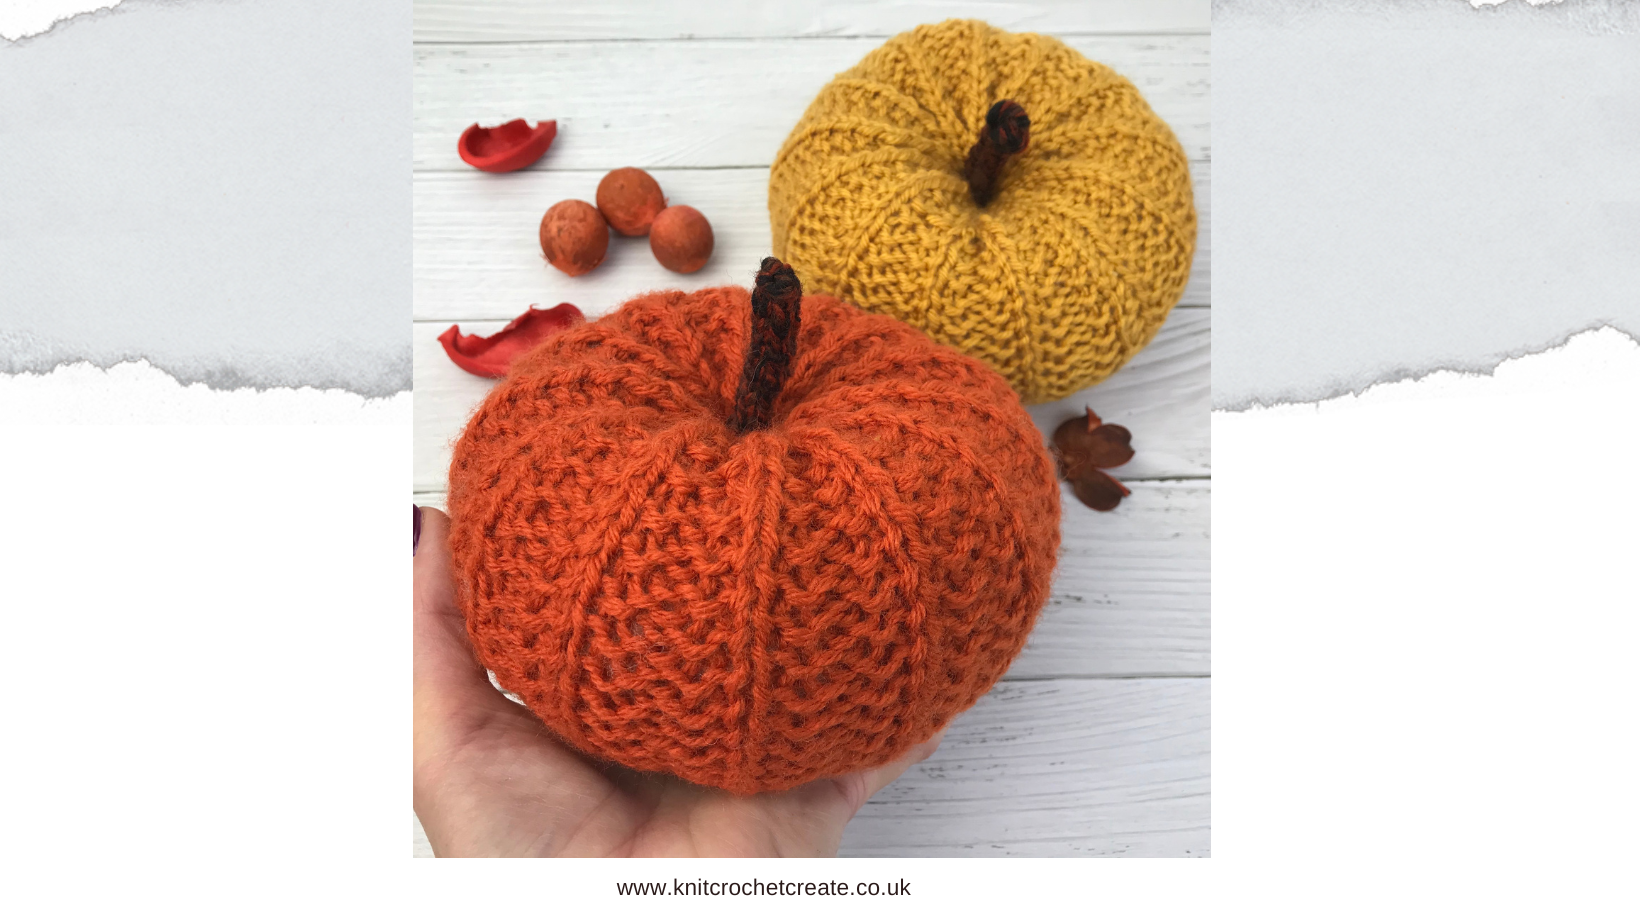 Hand holding a large knitted pumpkin in rust coloured yarn with a mustard knitted pumpkin in the background with scattered nuts and leaves